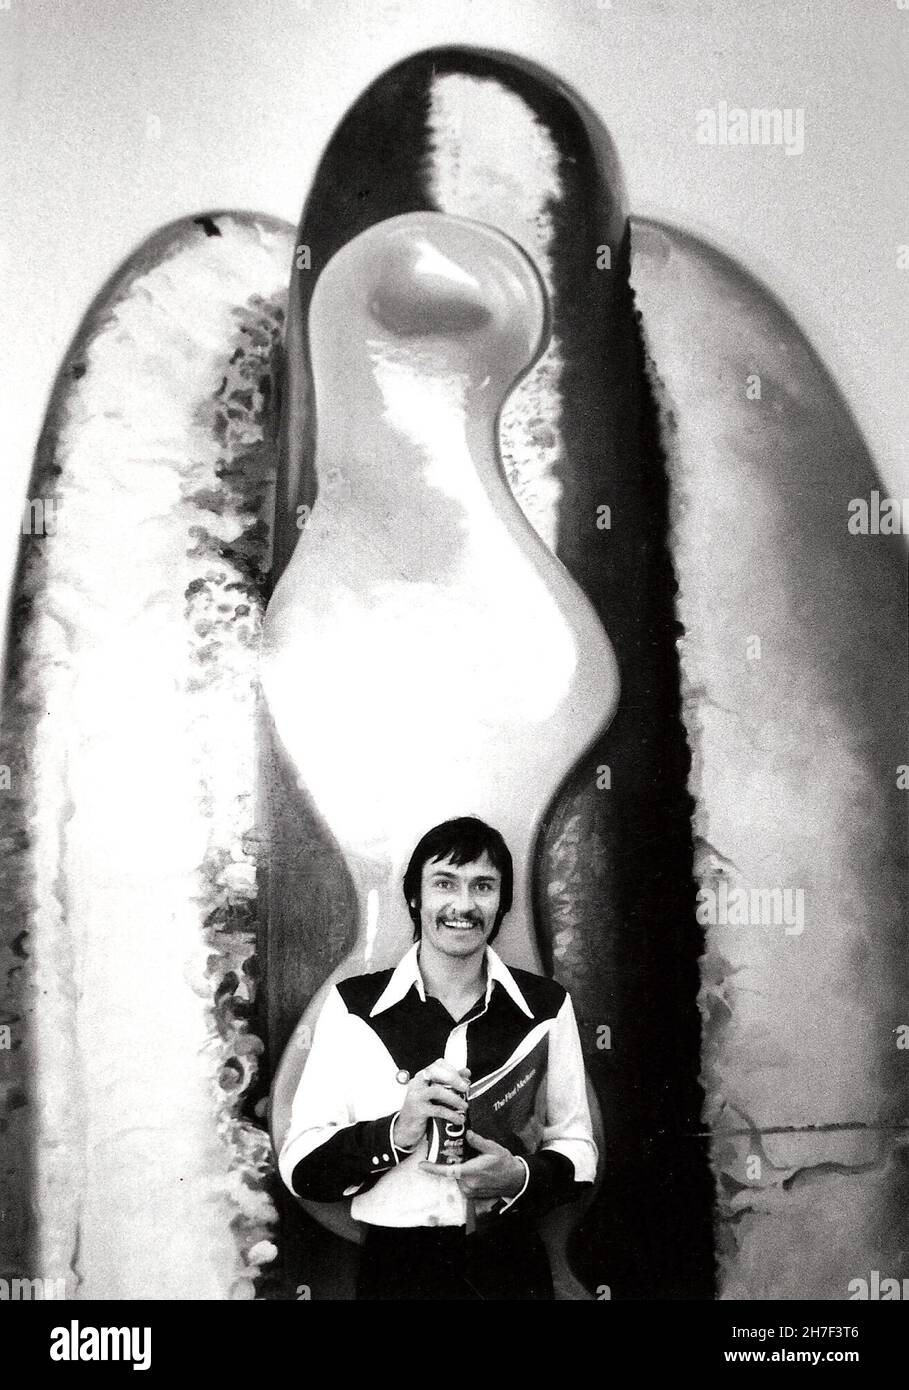 Paul Whitehead poses in front of a billboard with a hand-painted hot dog at the Foster and Kleiser billboard studio in Los Angeles, CA circa 1977 while organizing the Eyes And Ear Foundation art on billboards campaign. Stock Photo